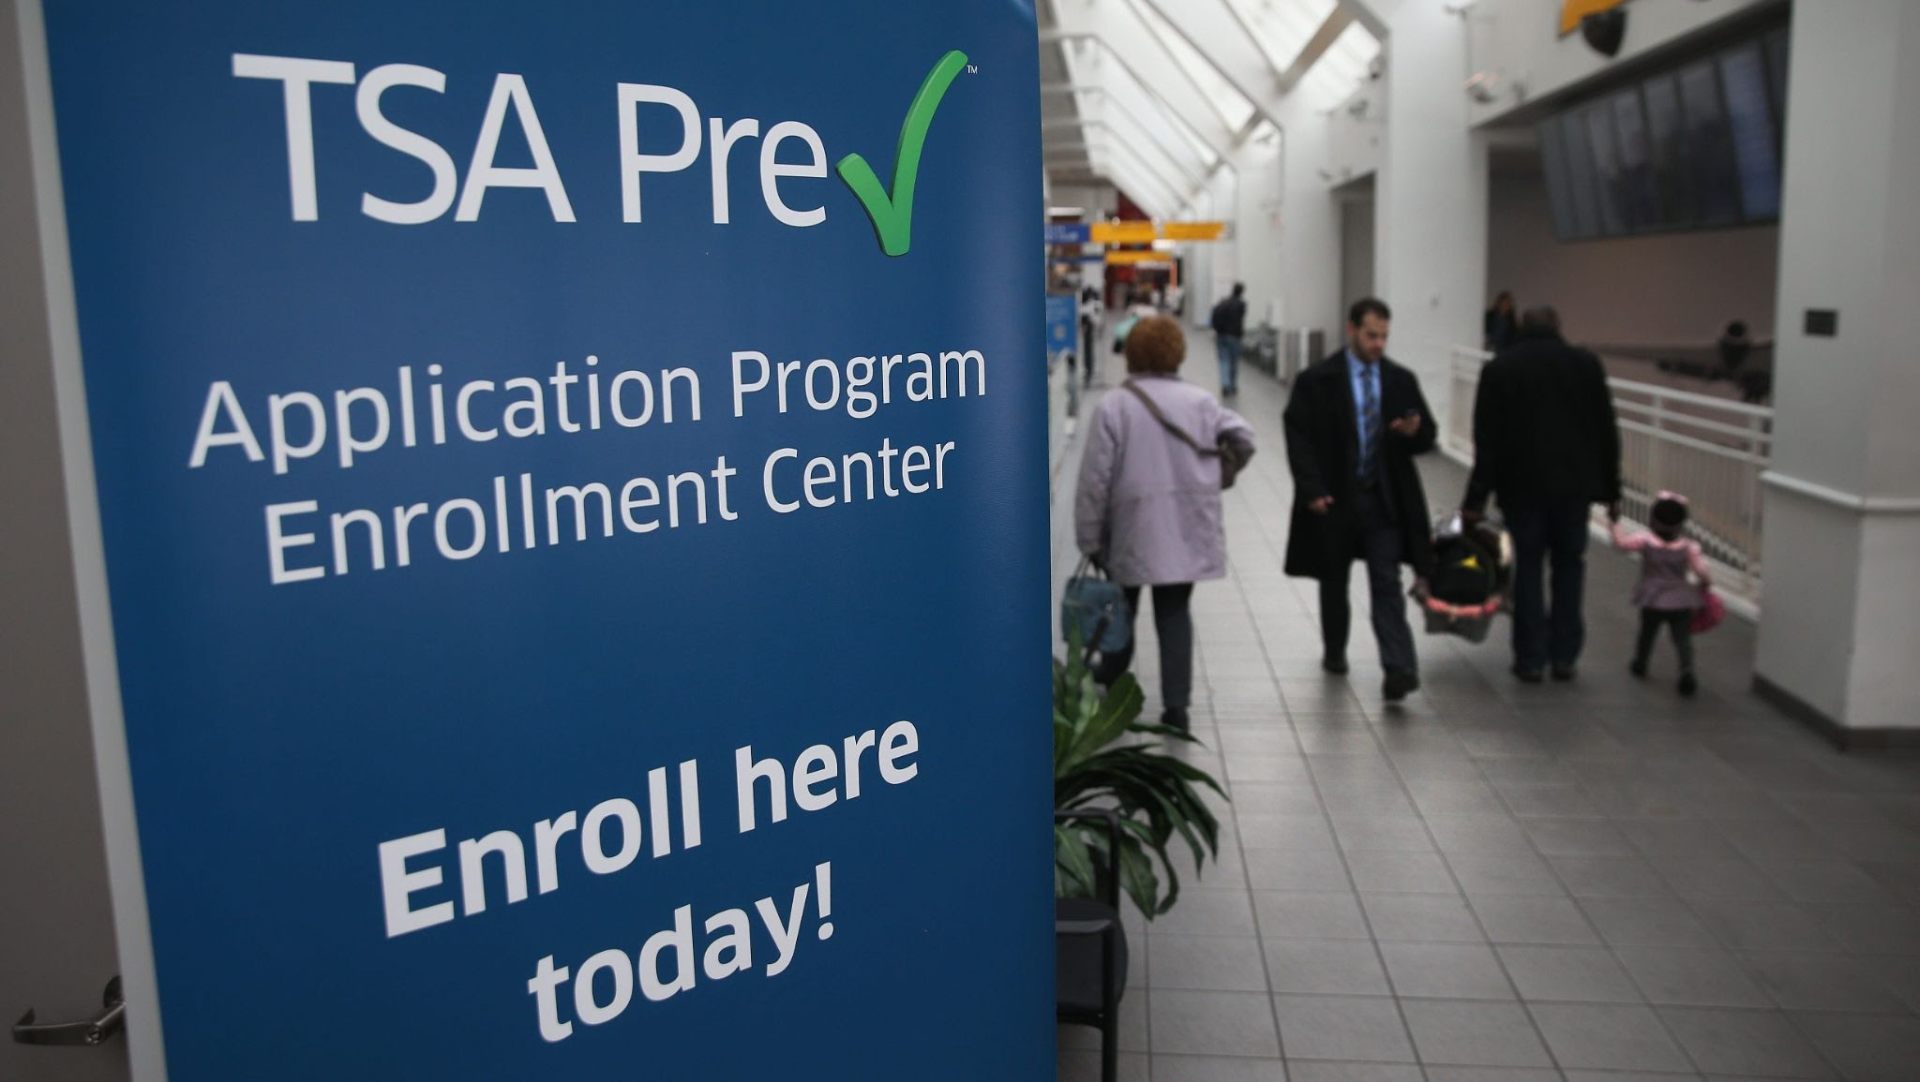 The Benefits of Having TSA PreCheck and How to Get It